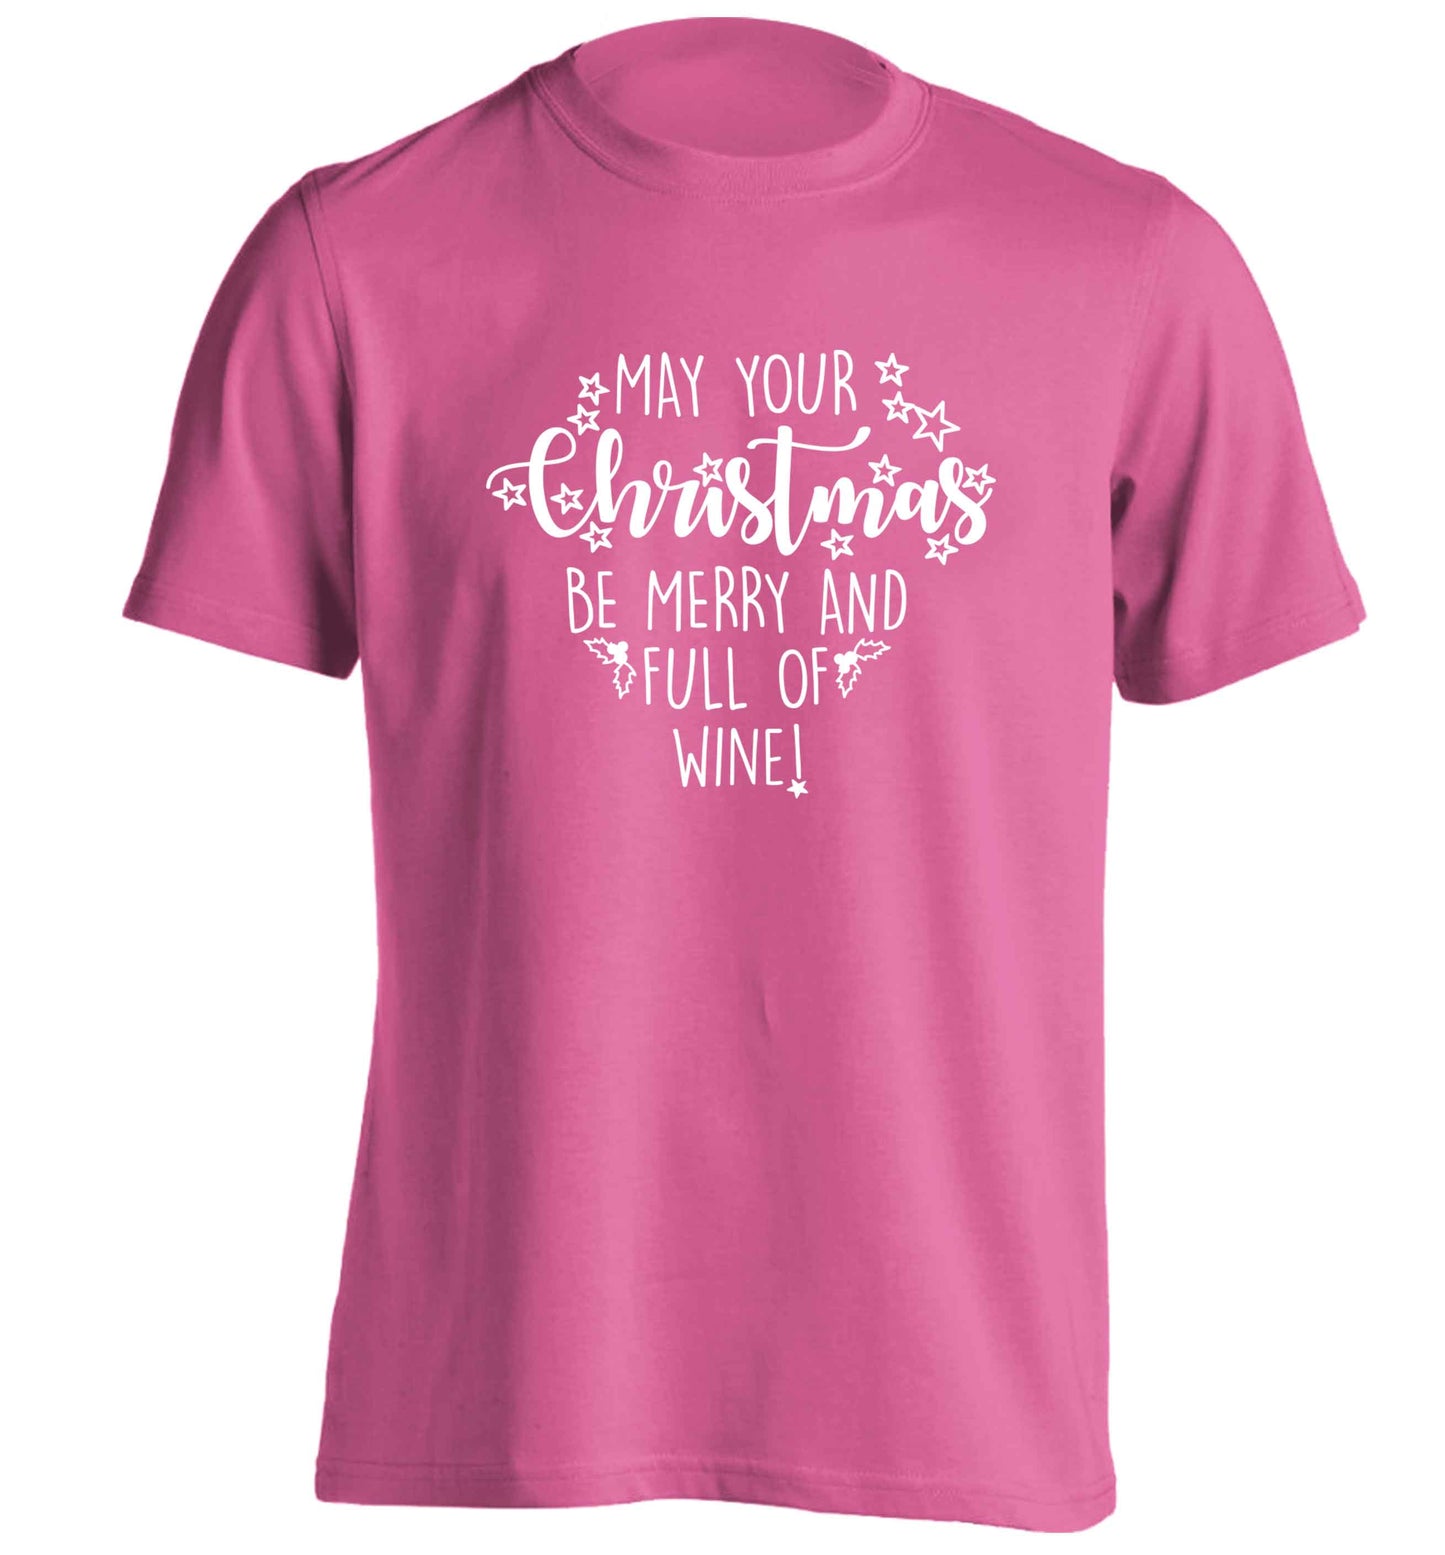 May your Christmas be merry and full of wine adults unisex pink Tshirt 2XL